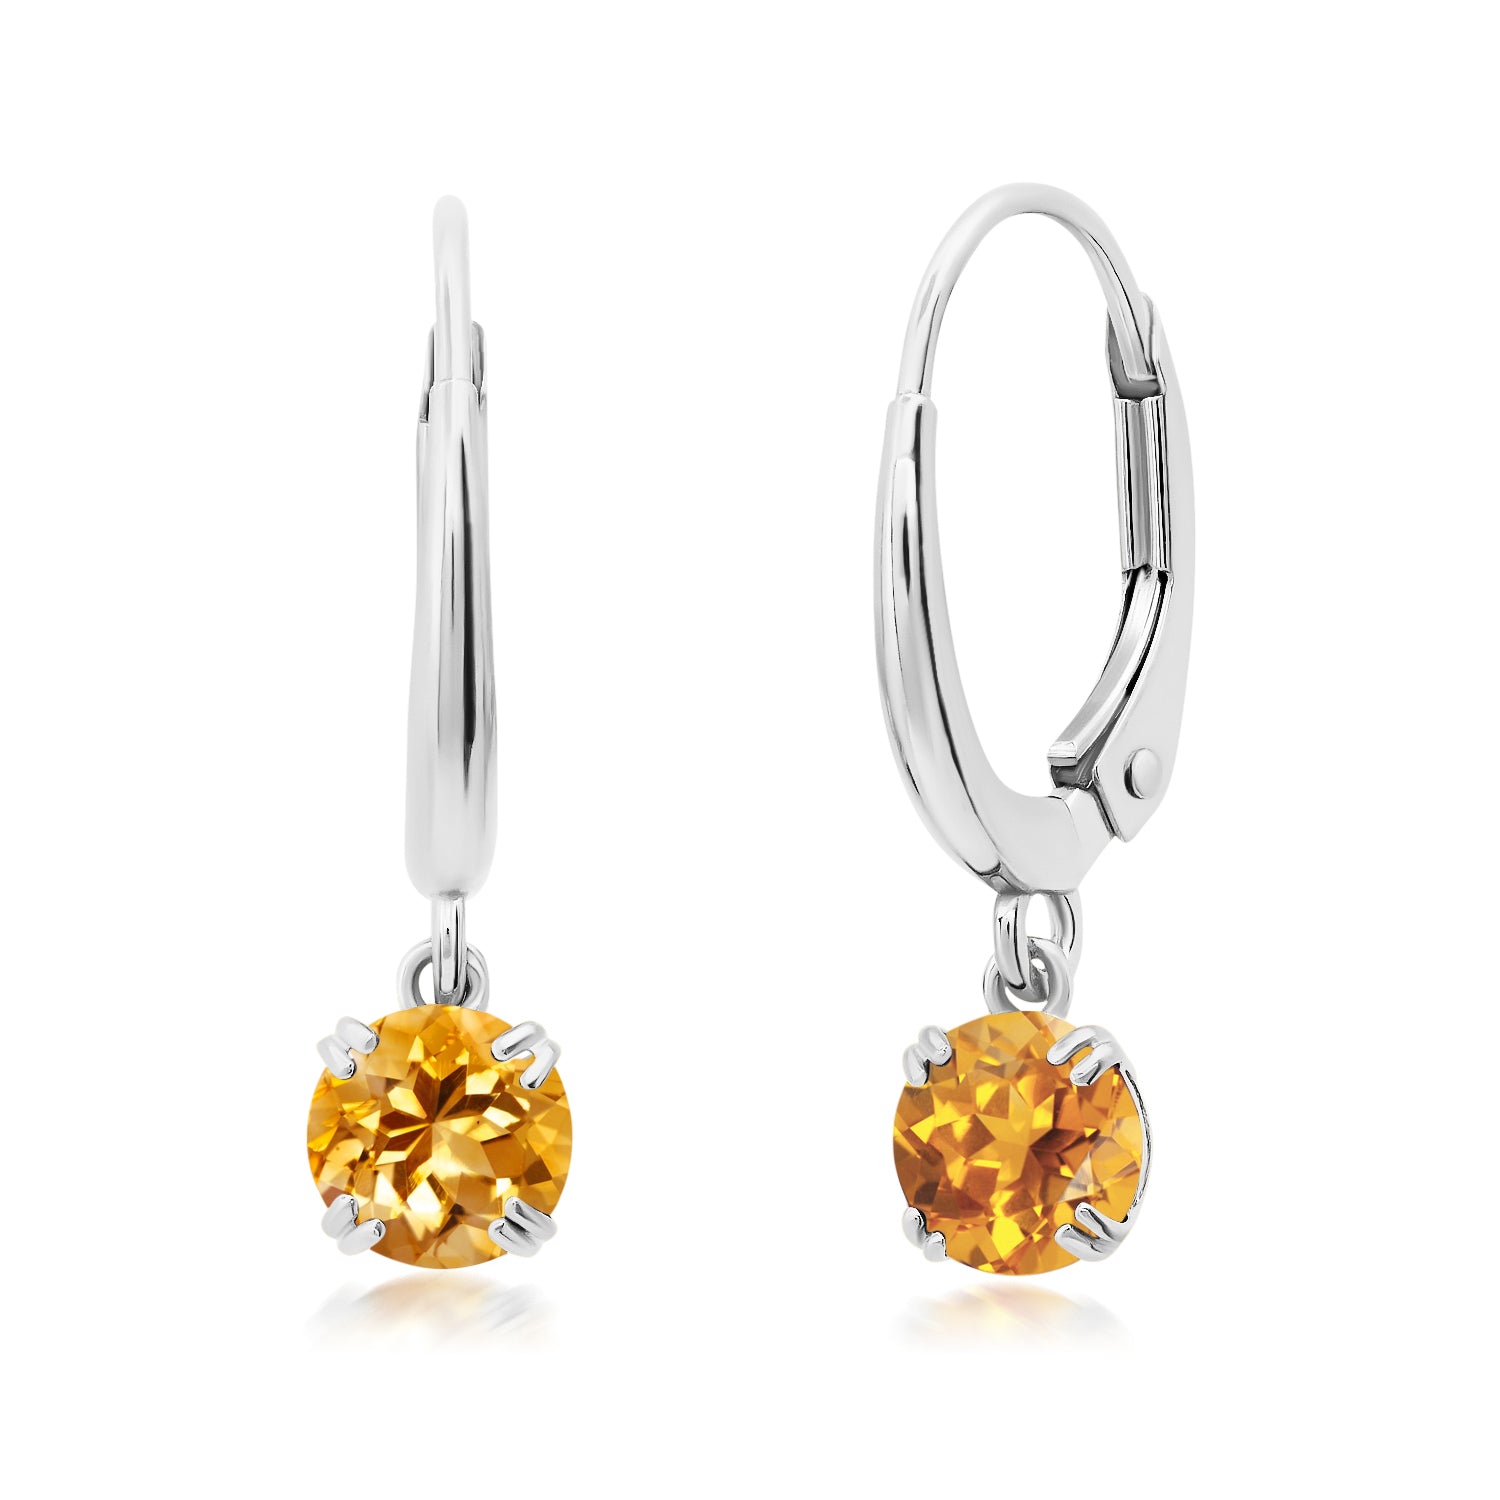 Nicole Miller 10k White or Yellow Gold Round Cut 5mm Gemstone Dangle Lever Back Earrings with Push Backs female